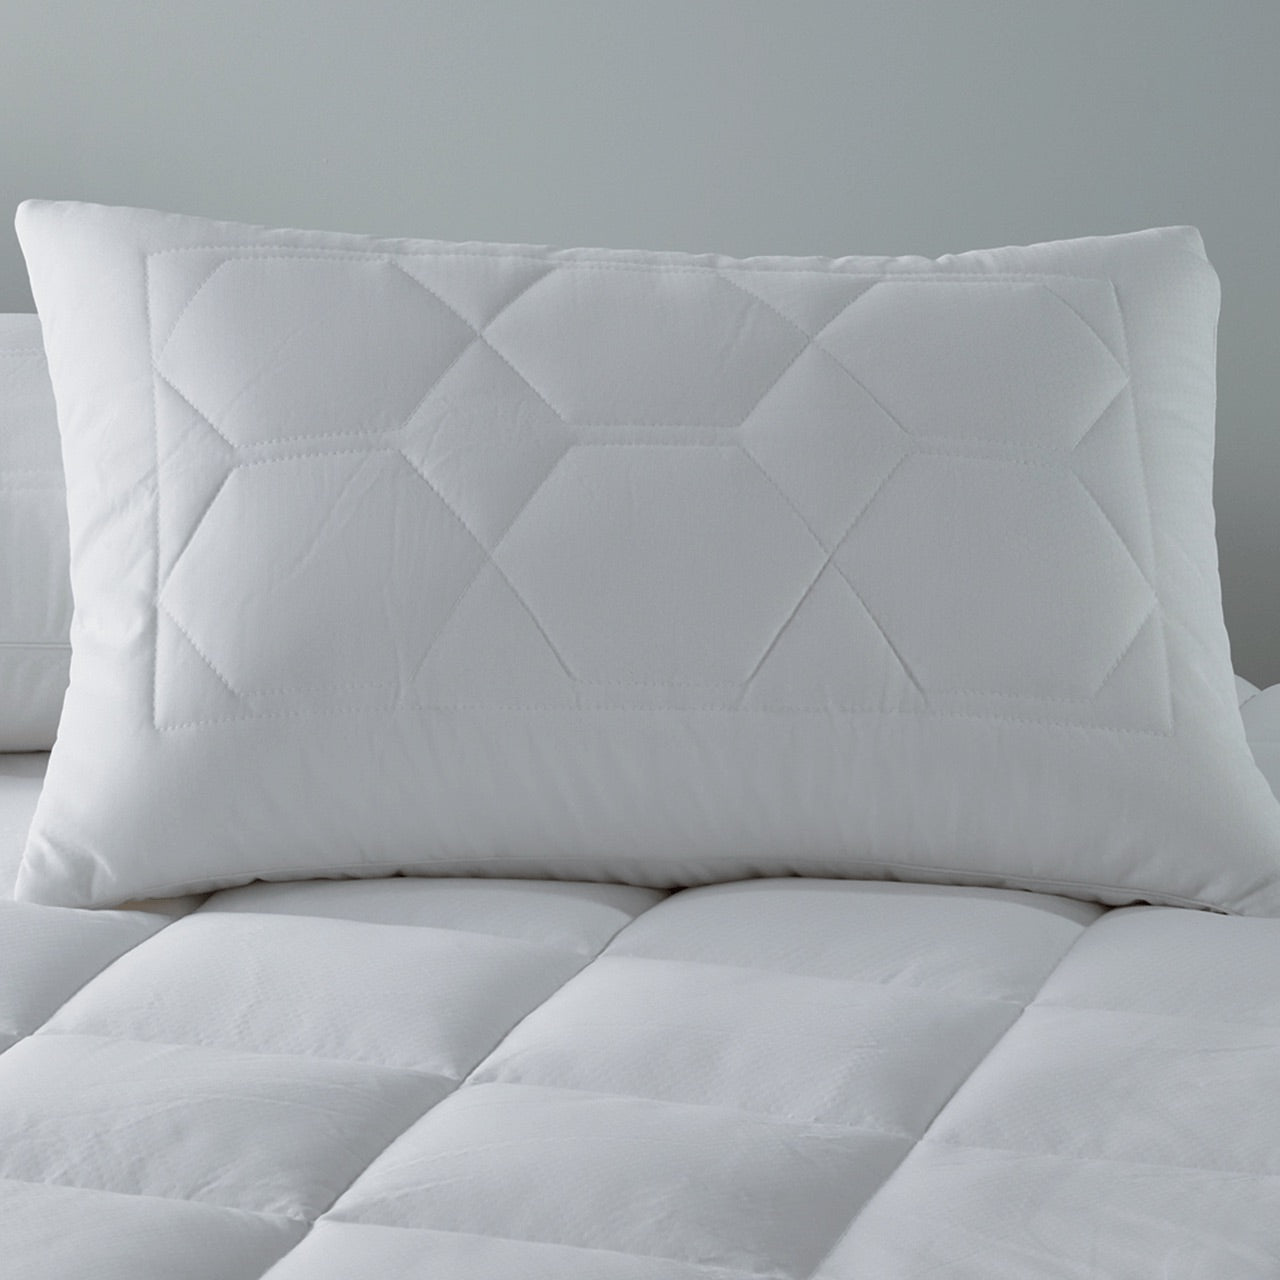 Zoomed in shot of Thermal Balancing Pillow Protector on bed